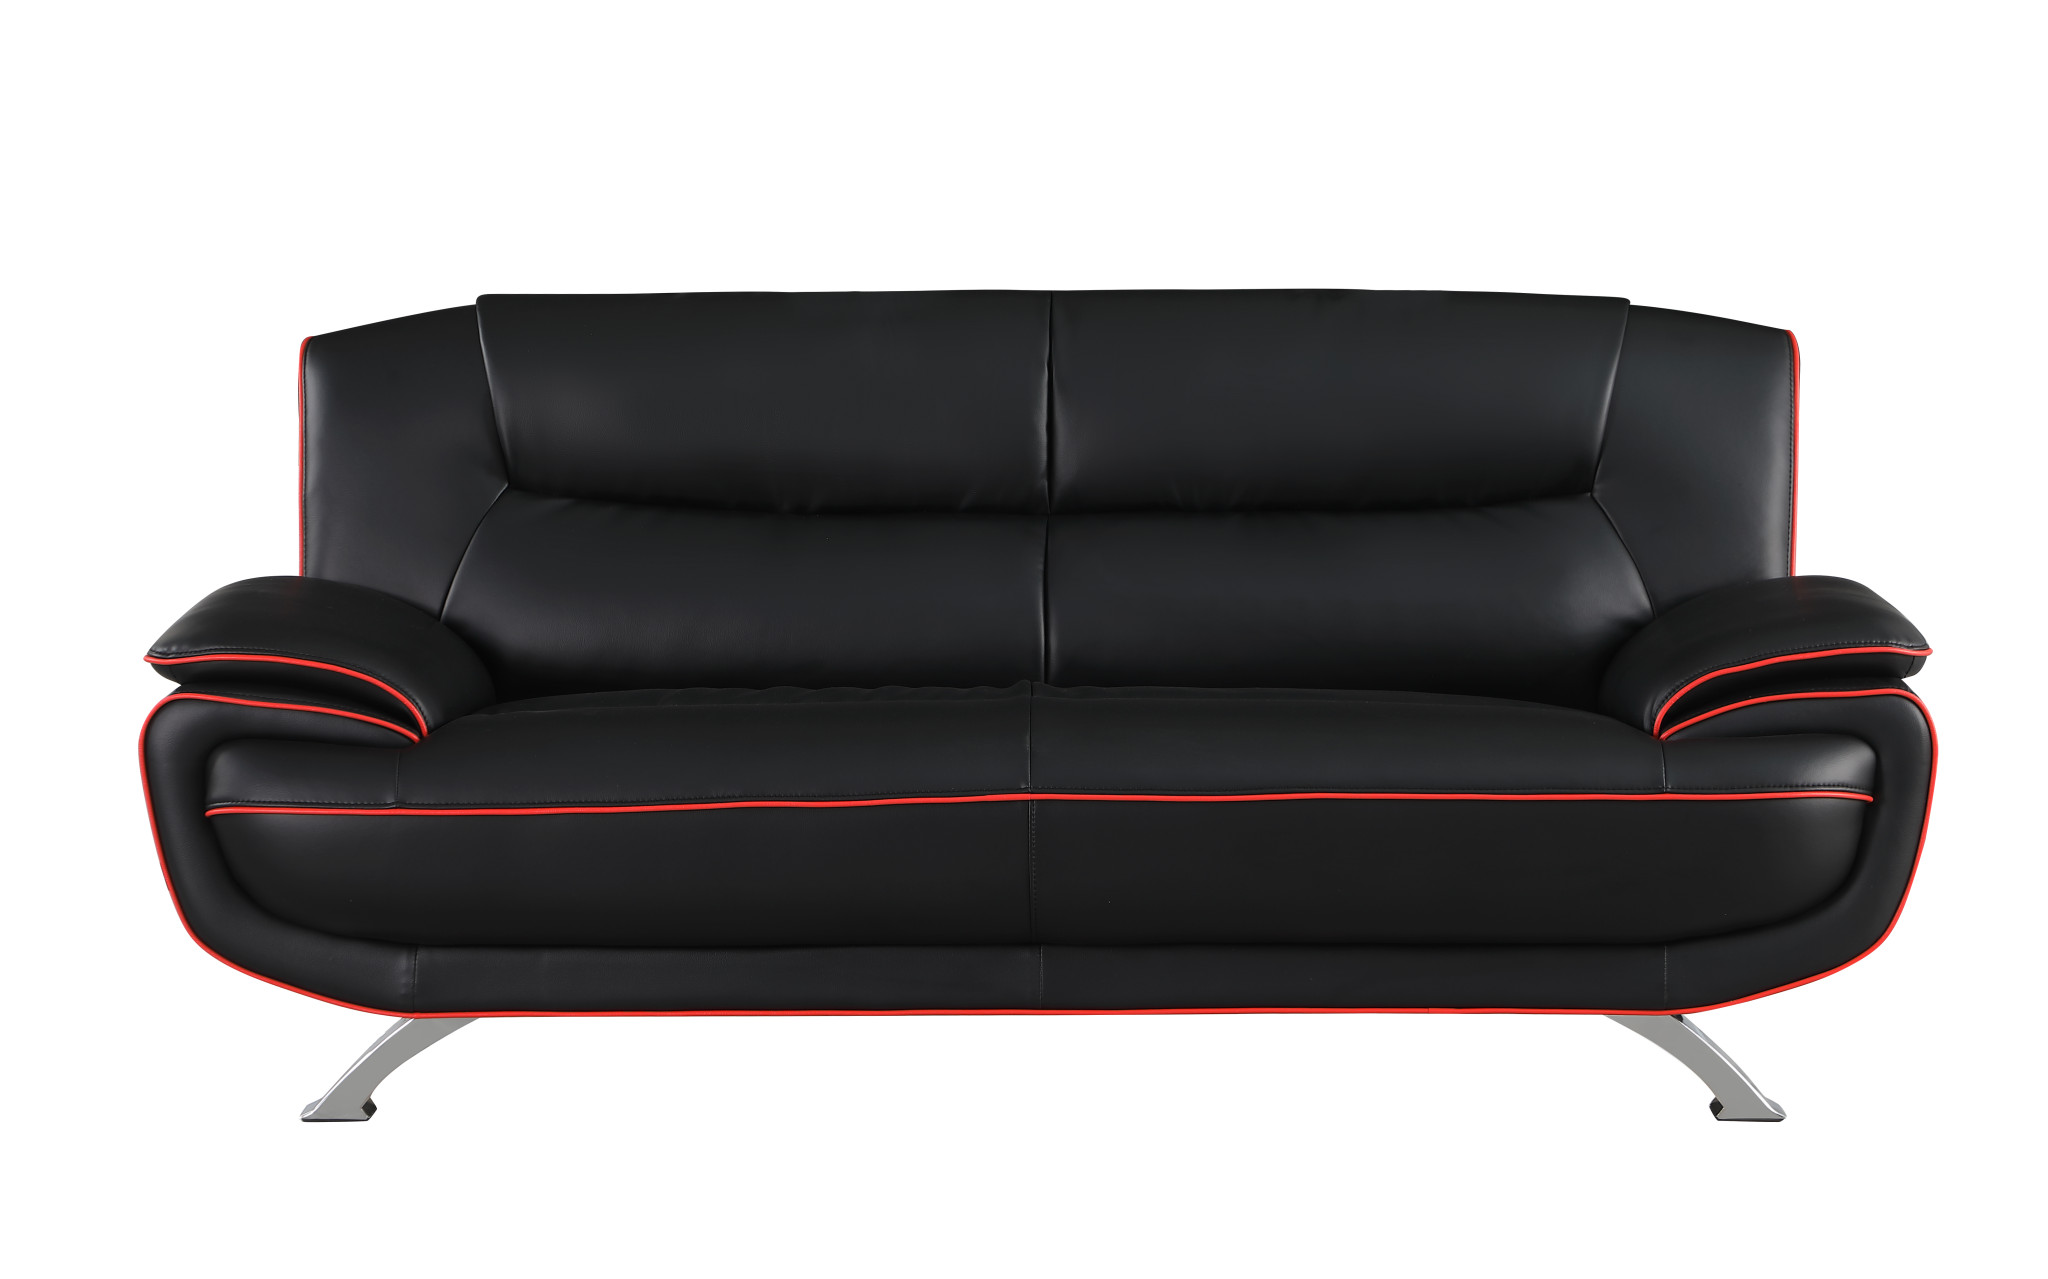 80" Black And Silver Leather Sofa-329455-1